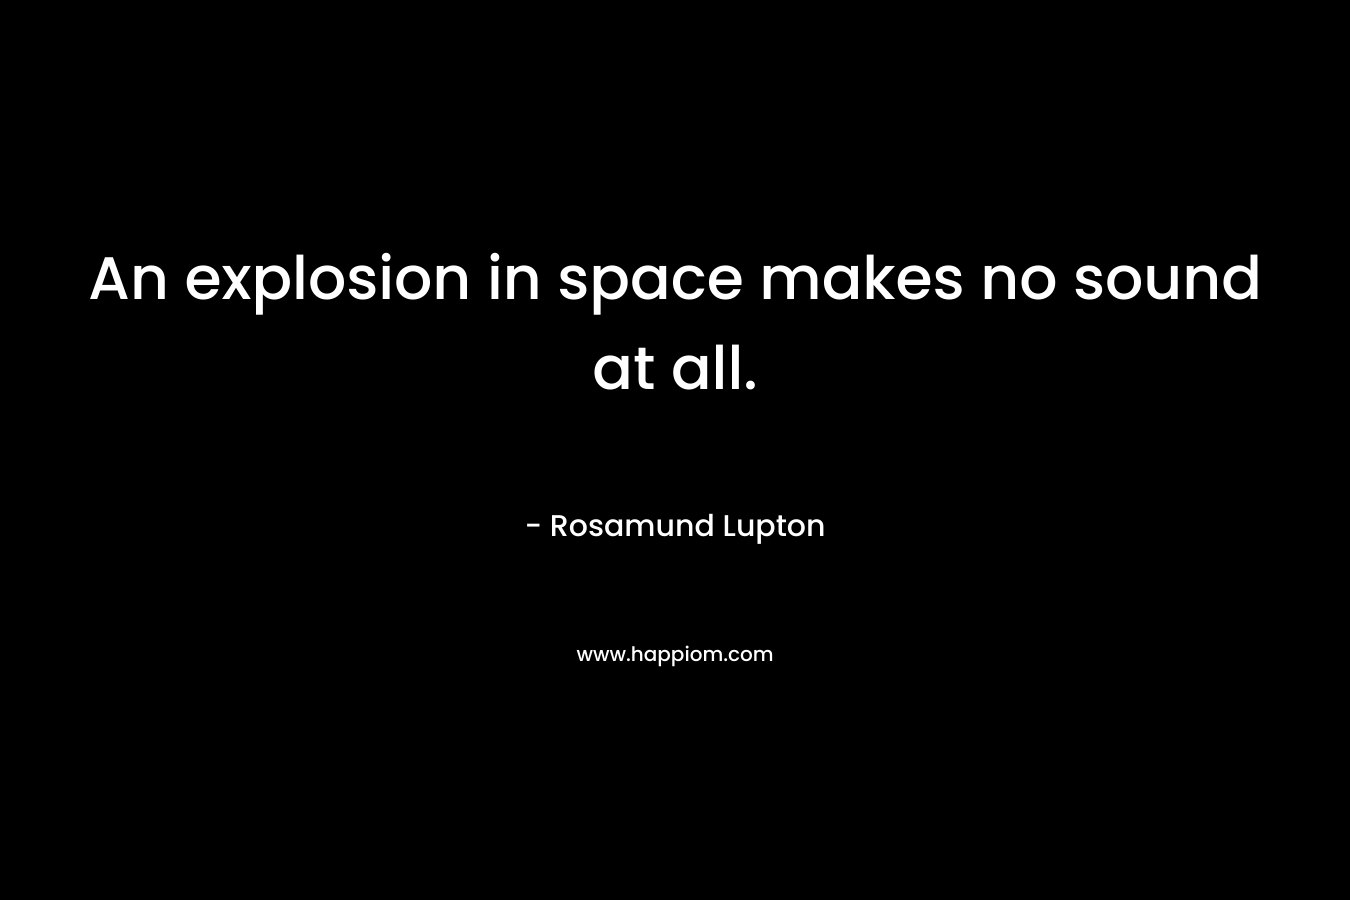 An explosion in space makes no sound at all. – Rosamund Lupton